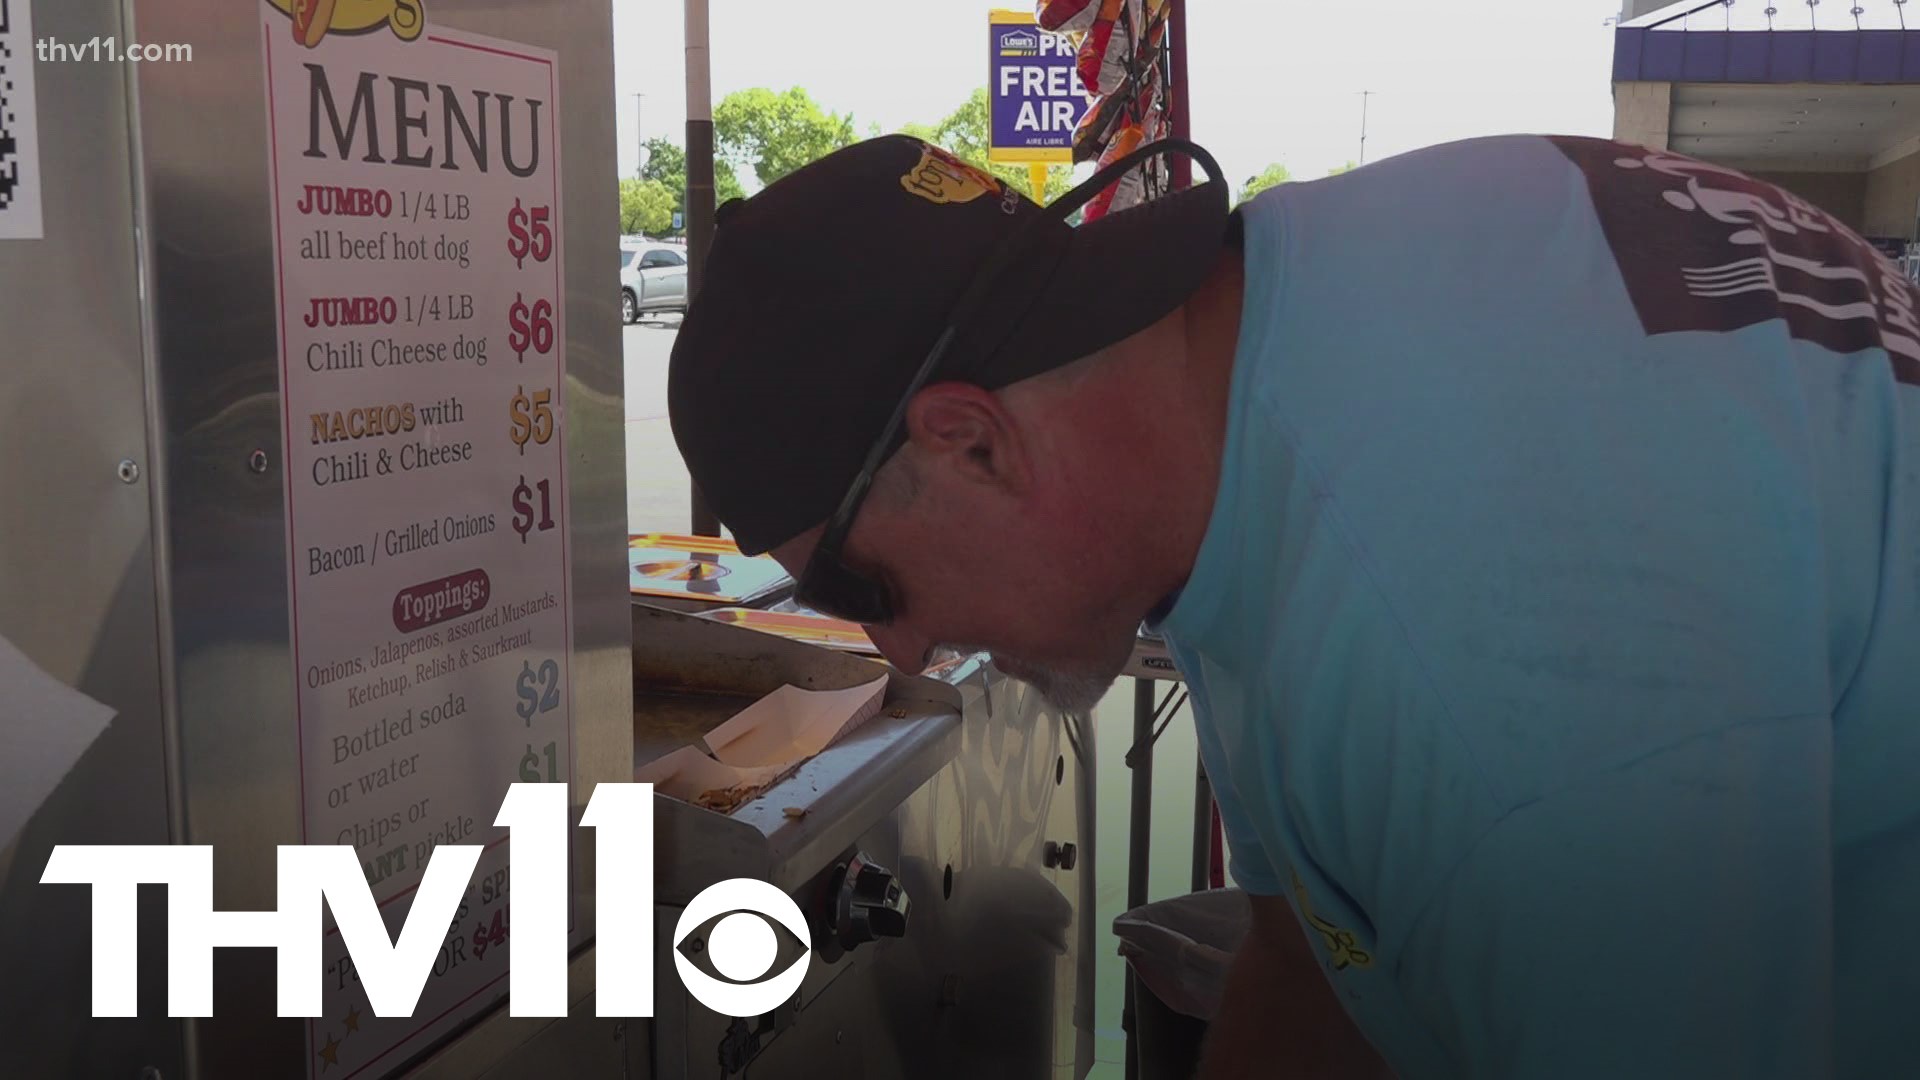 Neal Blandford, of Top Dog Catering, serves free hot dogs to the homeless population in Arkansas 6 days out of the week.